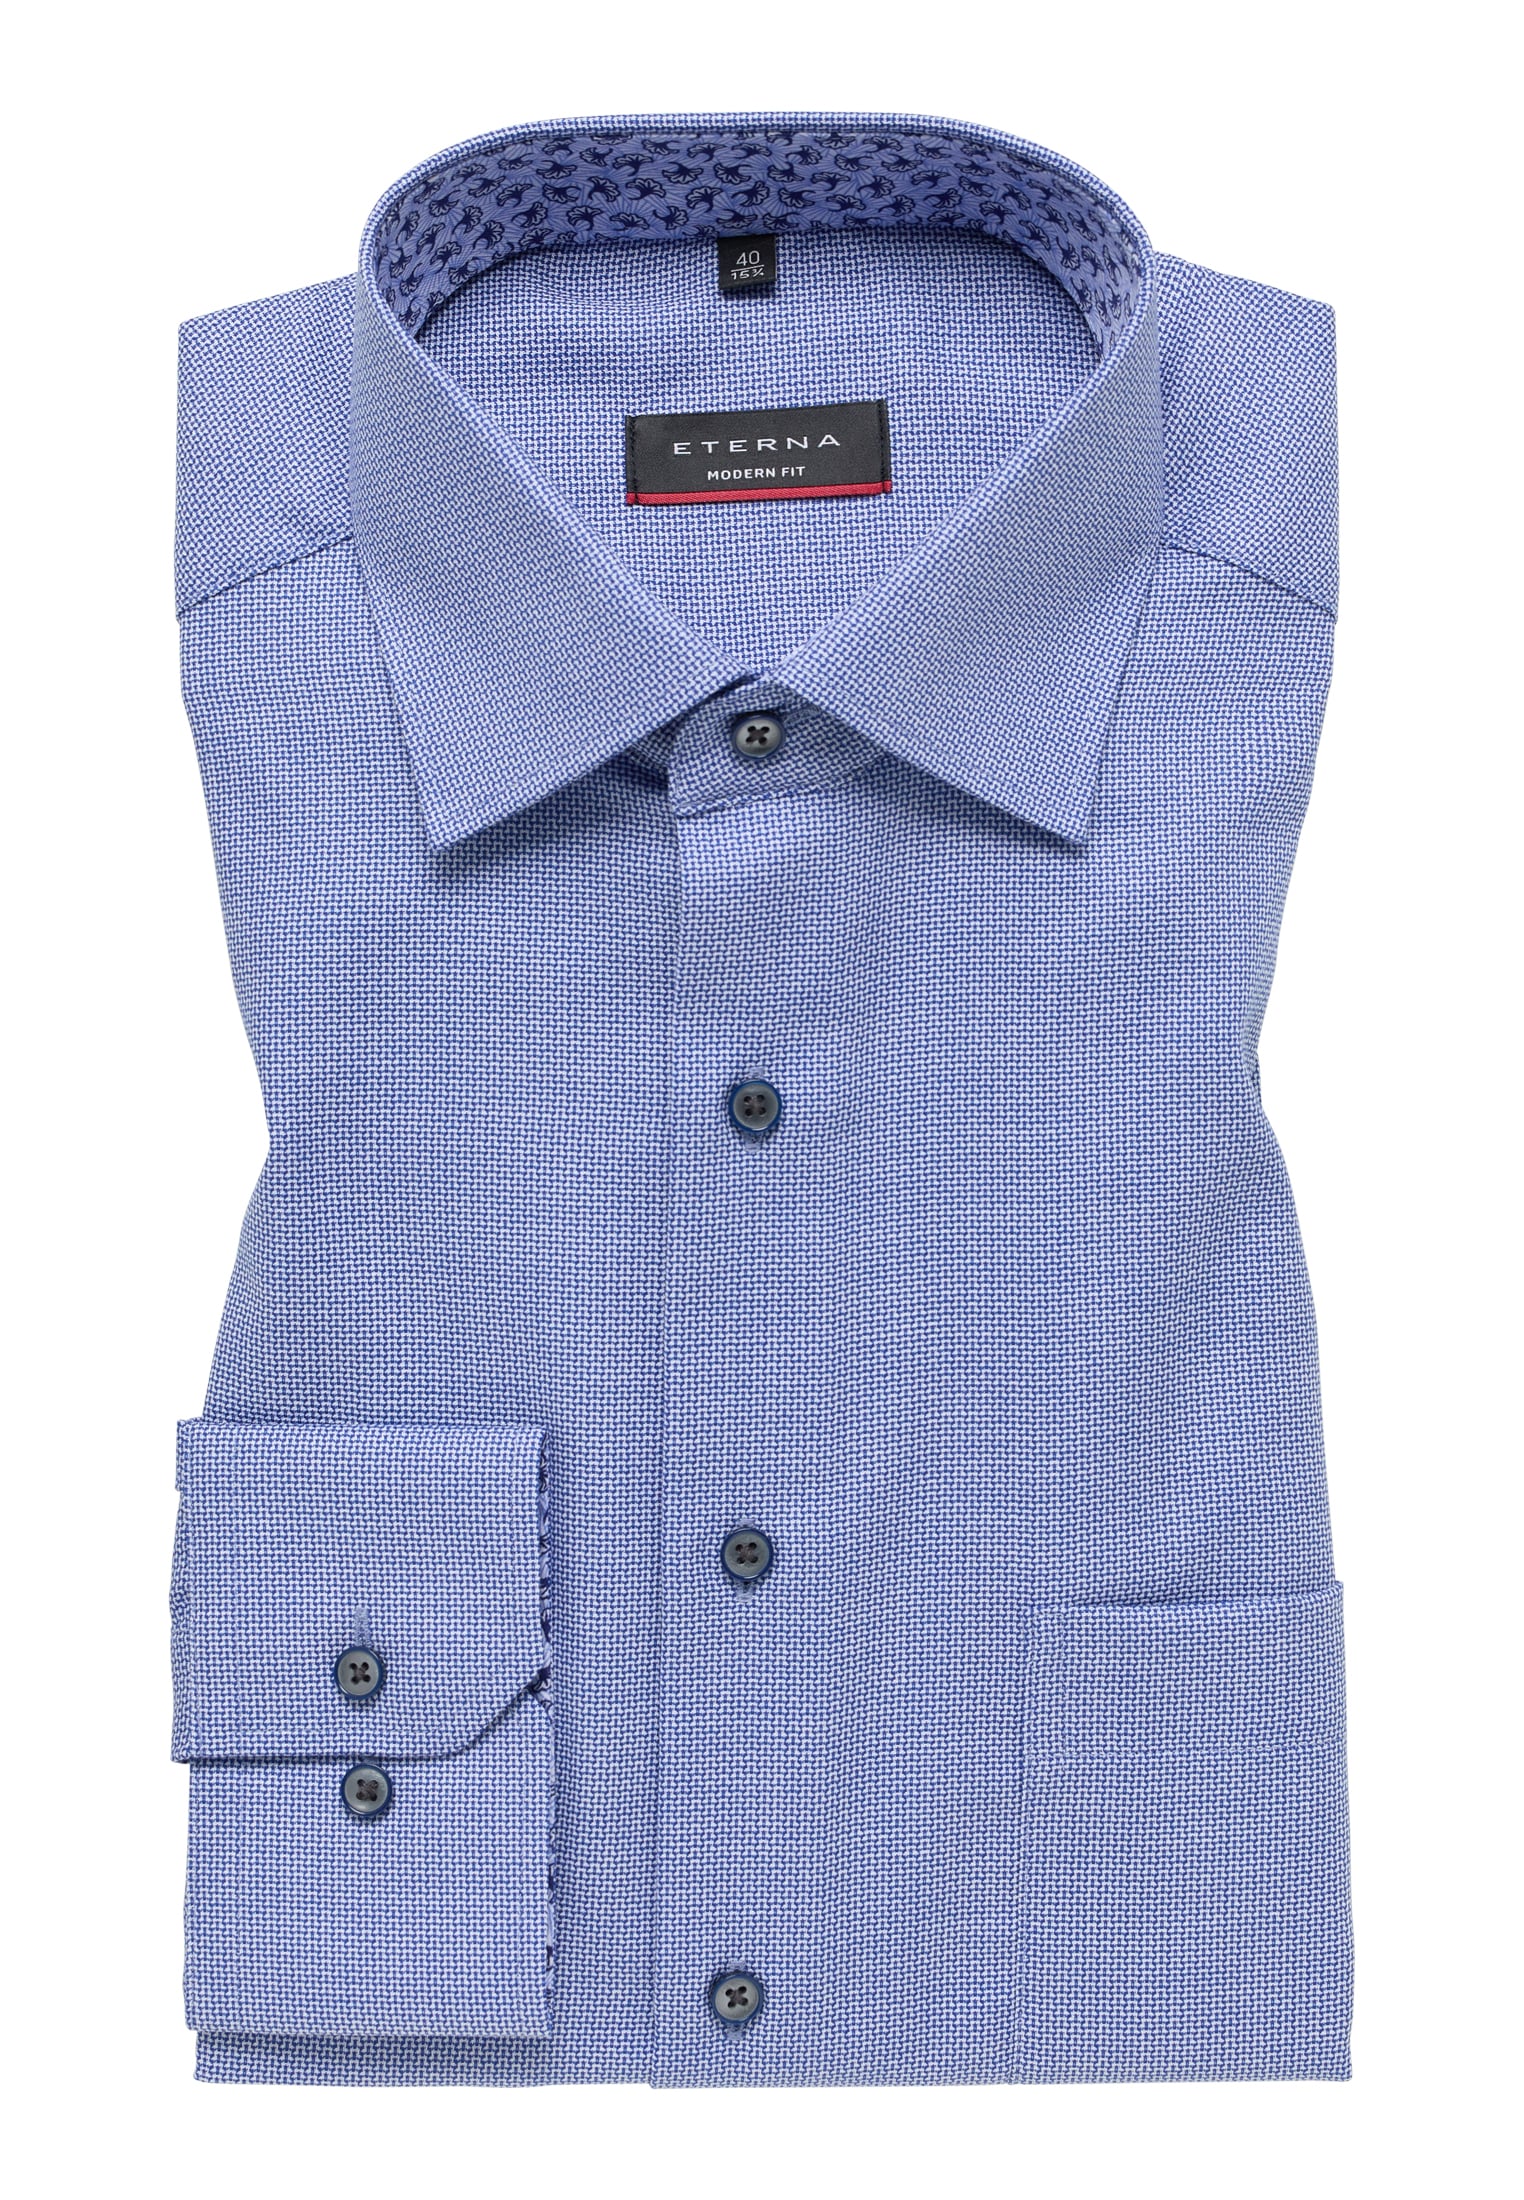 | | structured FIT royal 43 1SH11802-01-51-43-1/1 long | in sleeve blue Shirt MODERN blue | royal